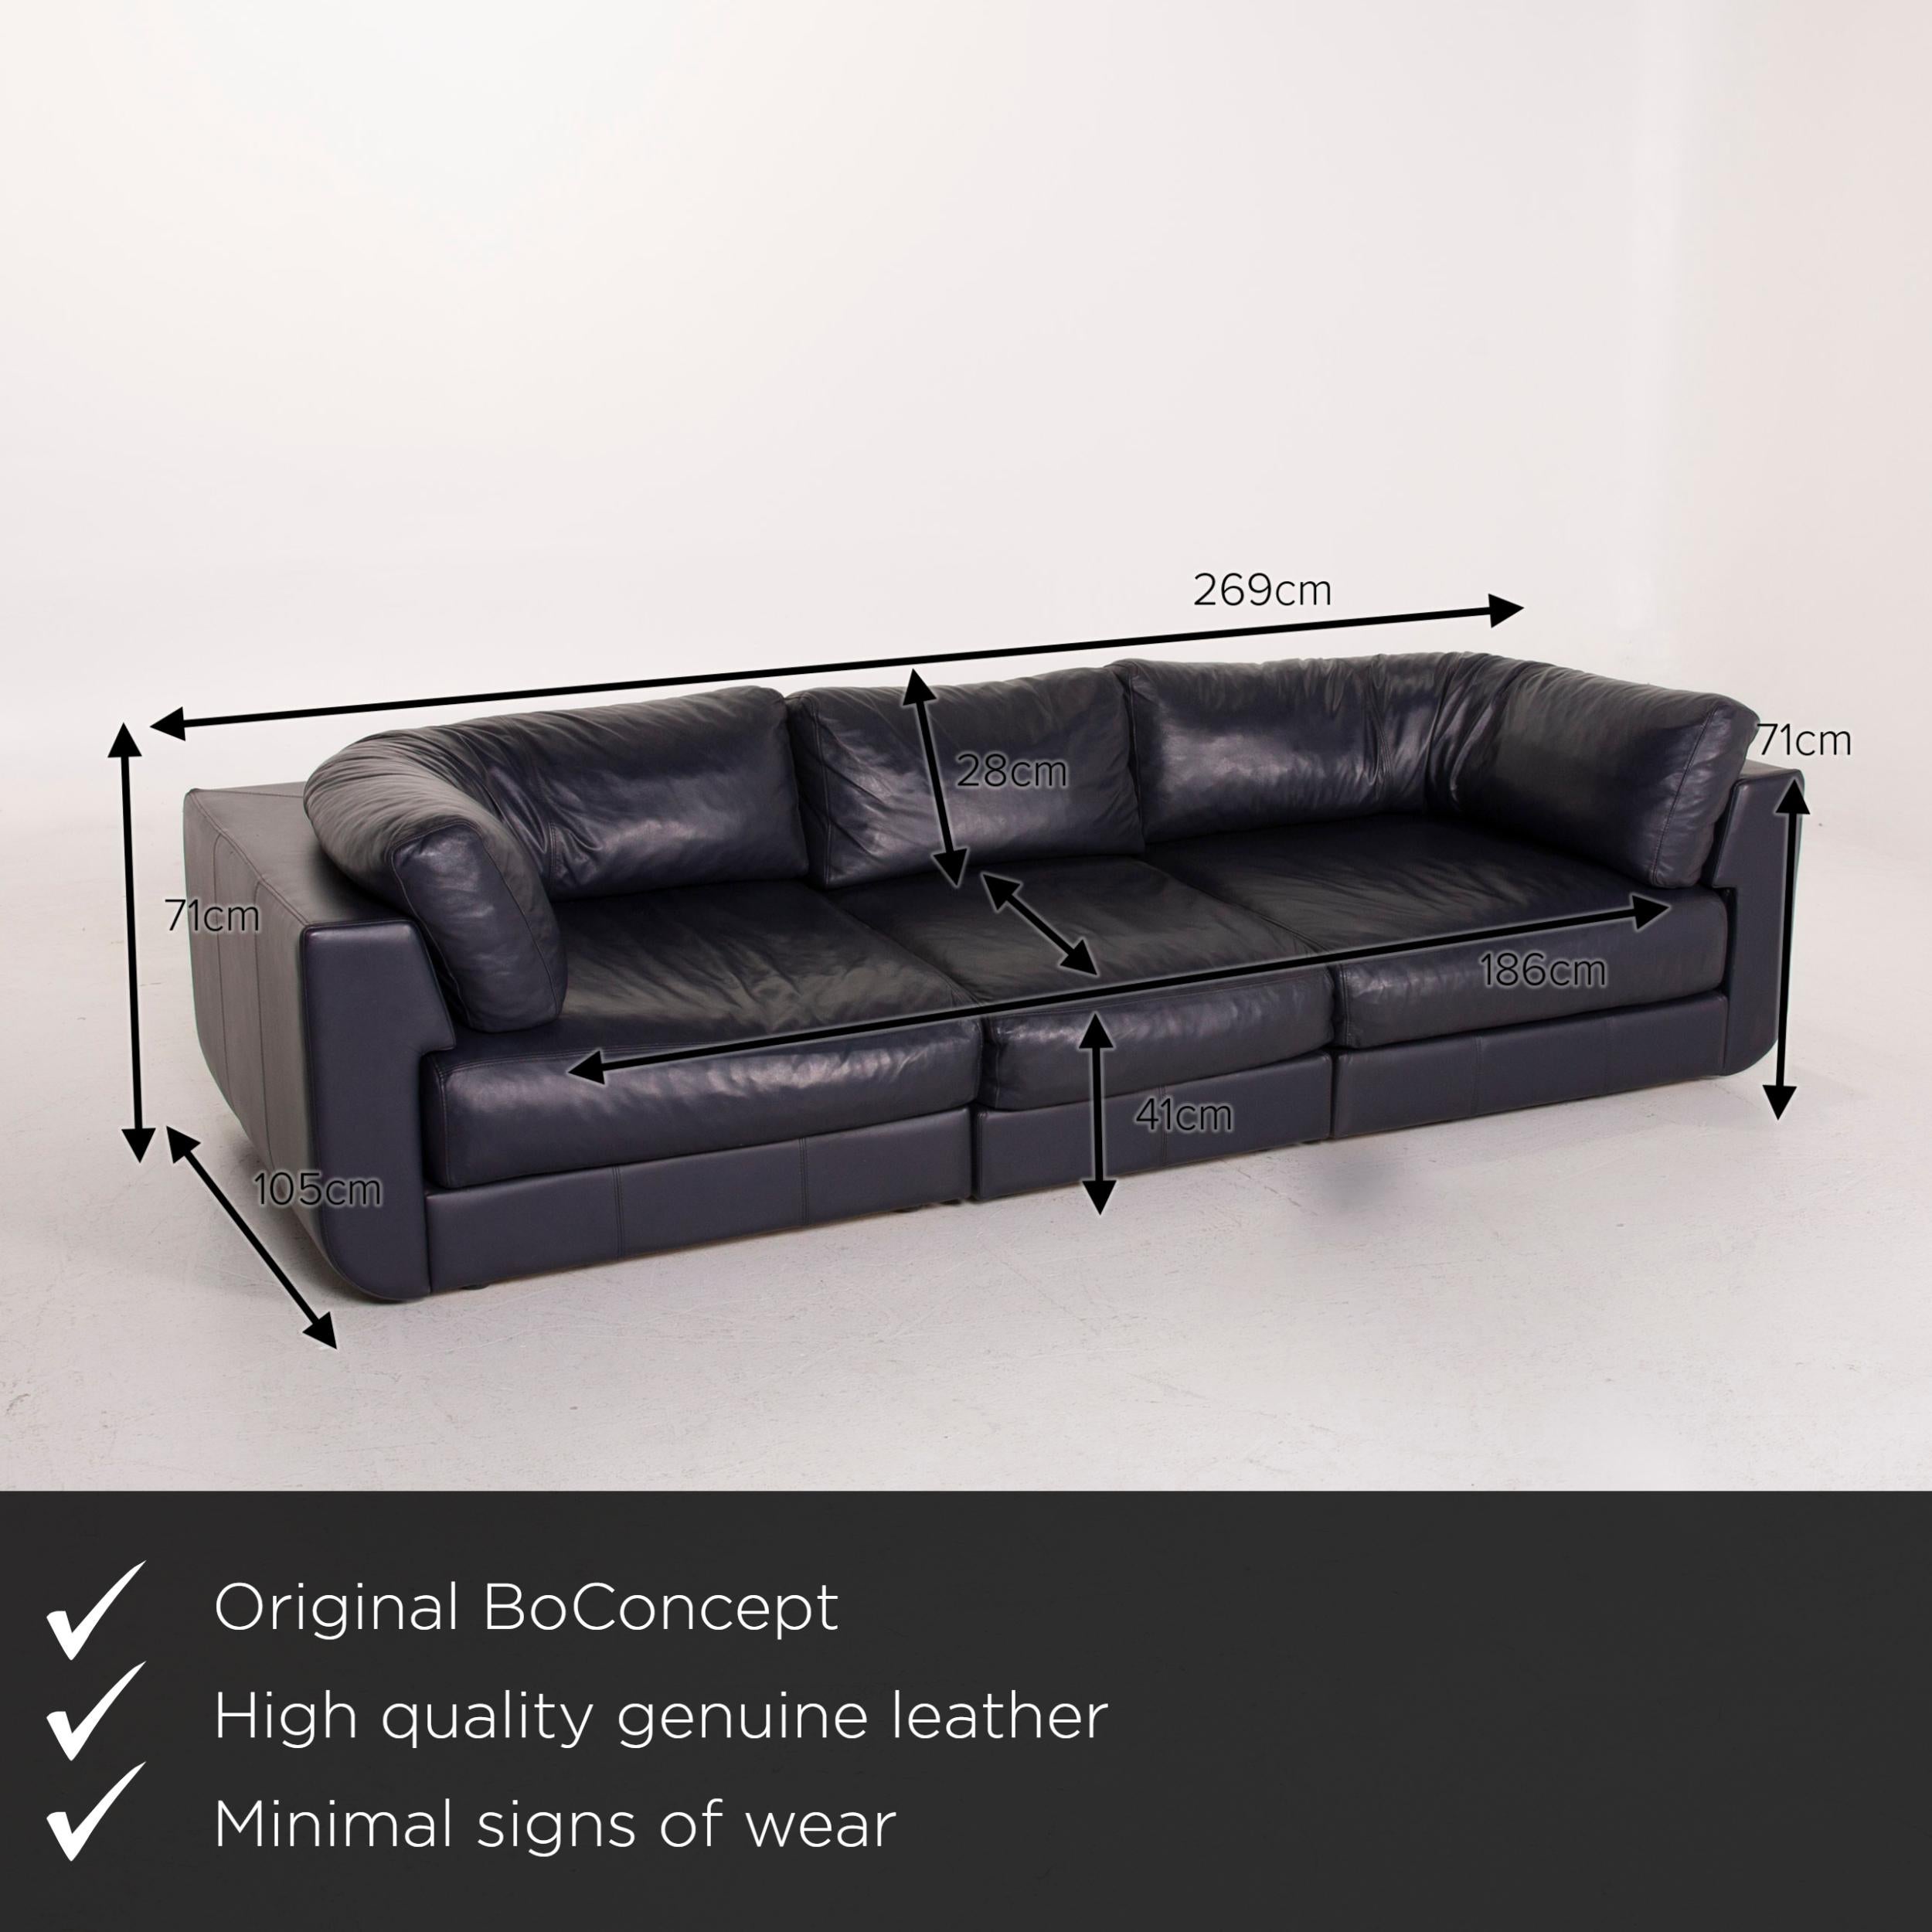 We present to you a BoConcept Largo leather sofa blue three-seat.


 Product measurements in centimeters:
 

Depth 105
Width 269
Height 71
Seat height 41
Rest height 71
Seat depth 60
Seat width 186
Back height 28.
 